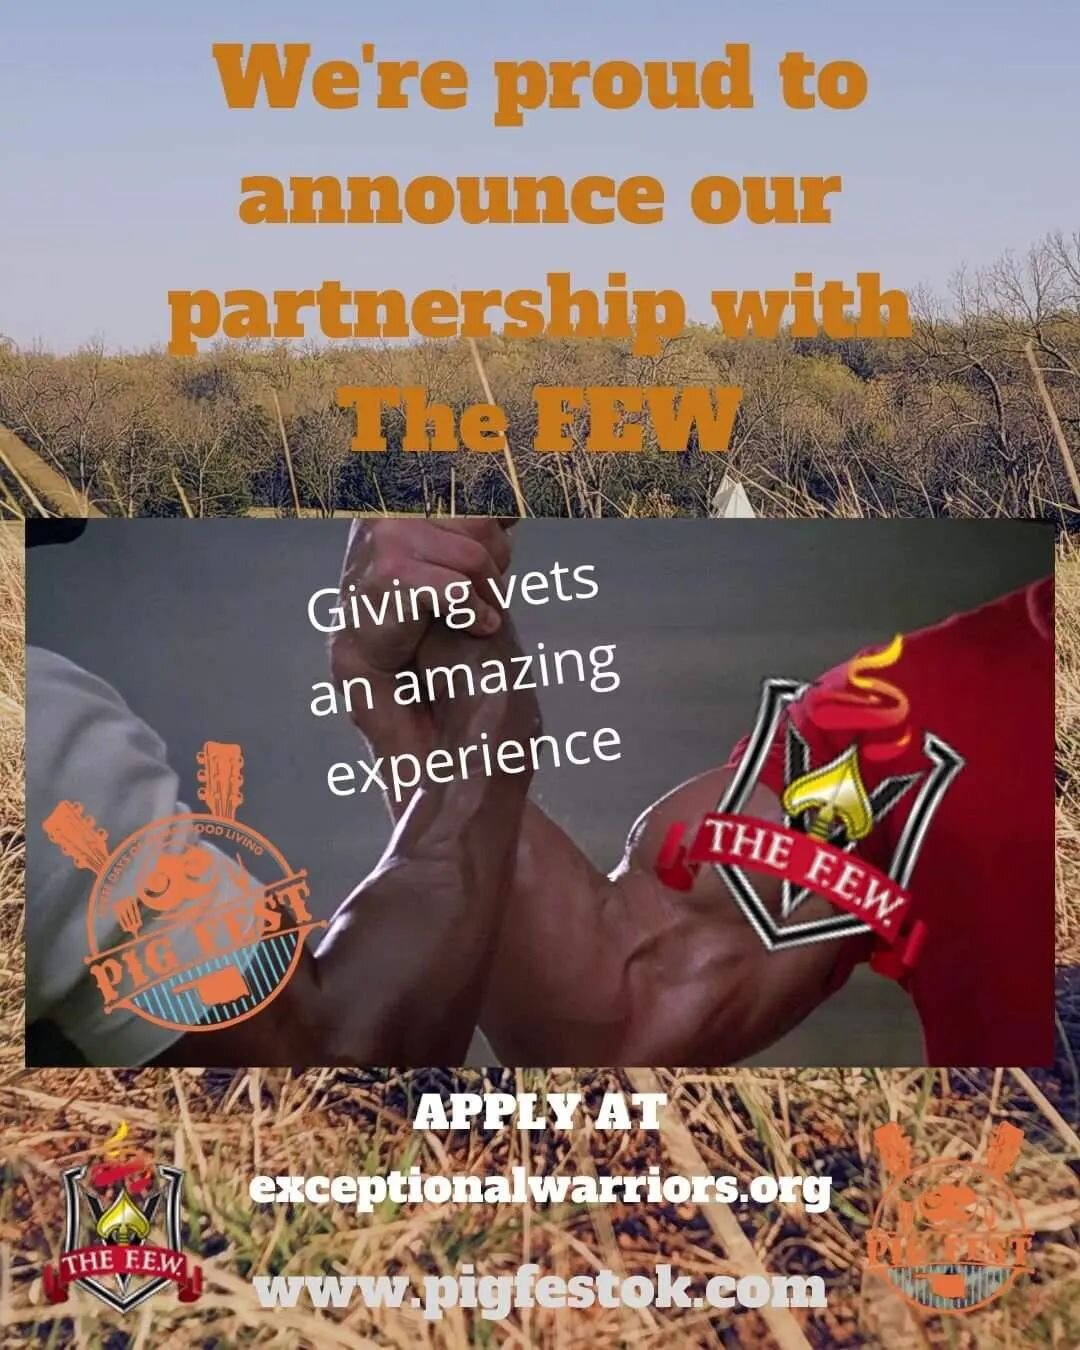 We're excited and proud to announce our partnership with The Foundation for Exceptional Warriors - The FEW 😁

The FEW gives veterans the chance to apply for some absolutely amazing experiences free of charge! 

So, if you're a vet or know one, head 